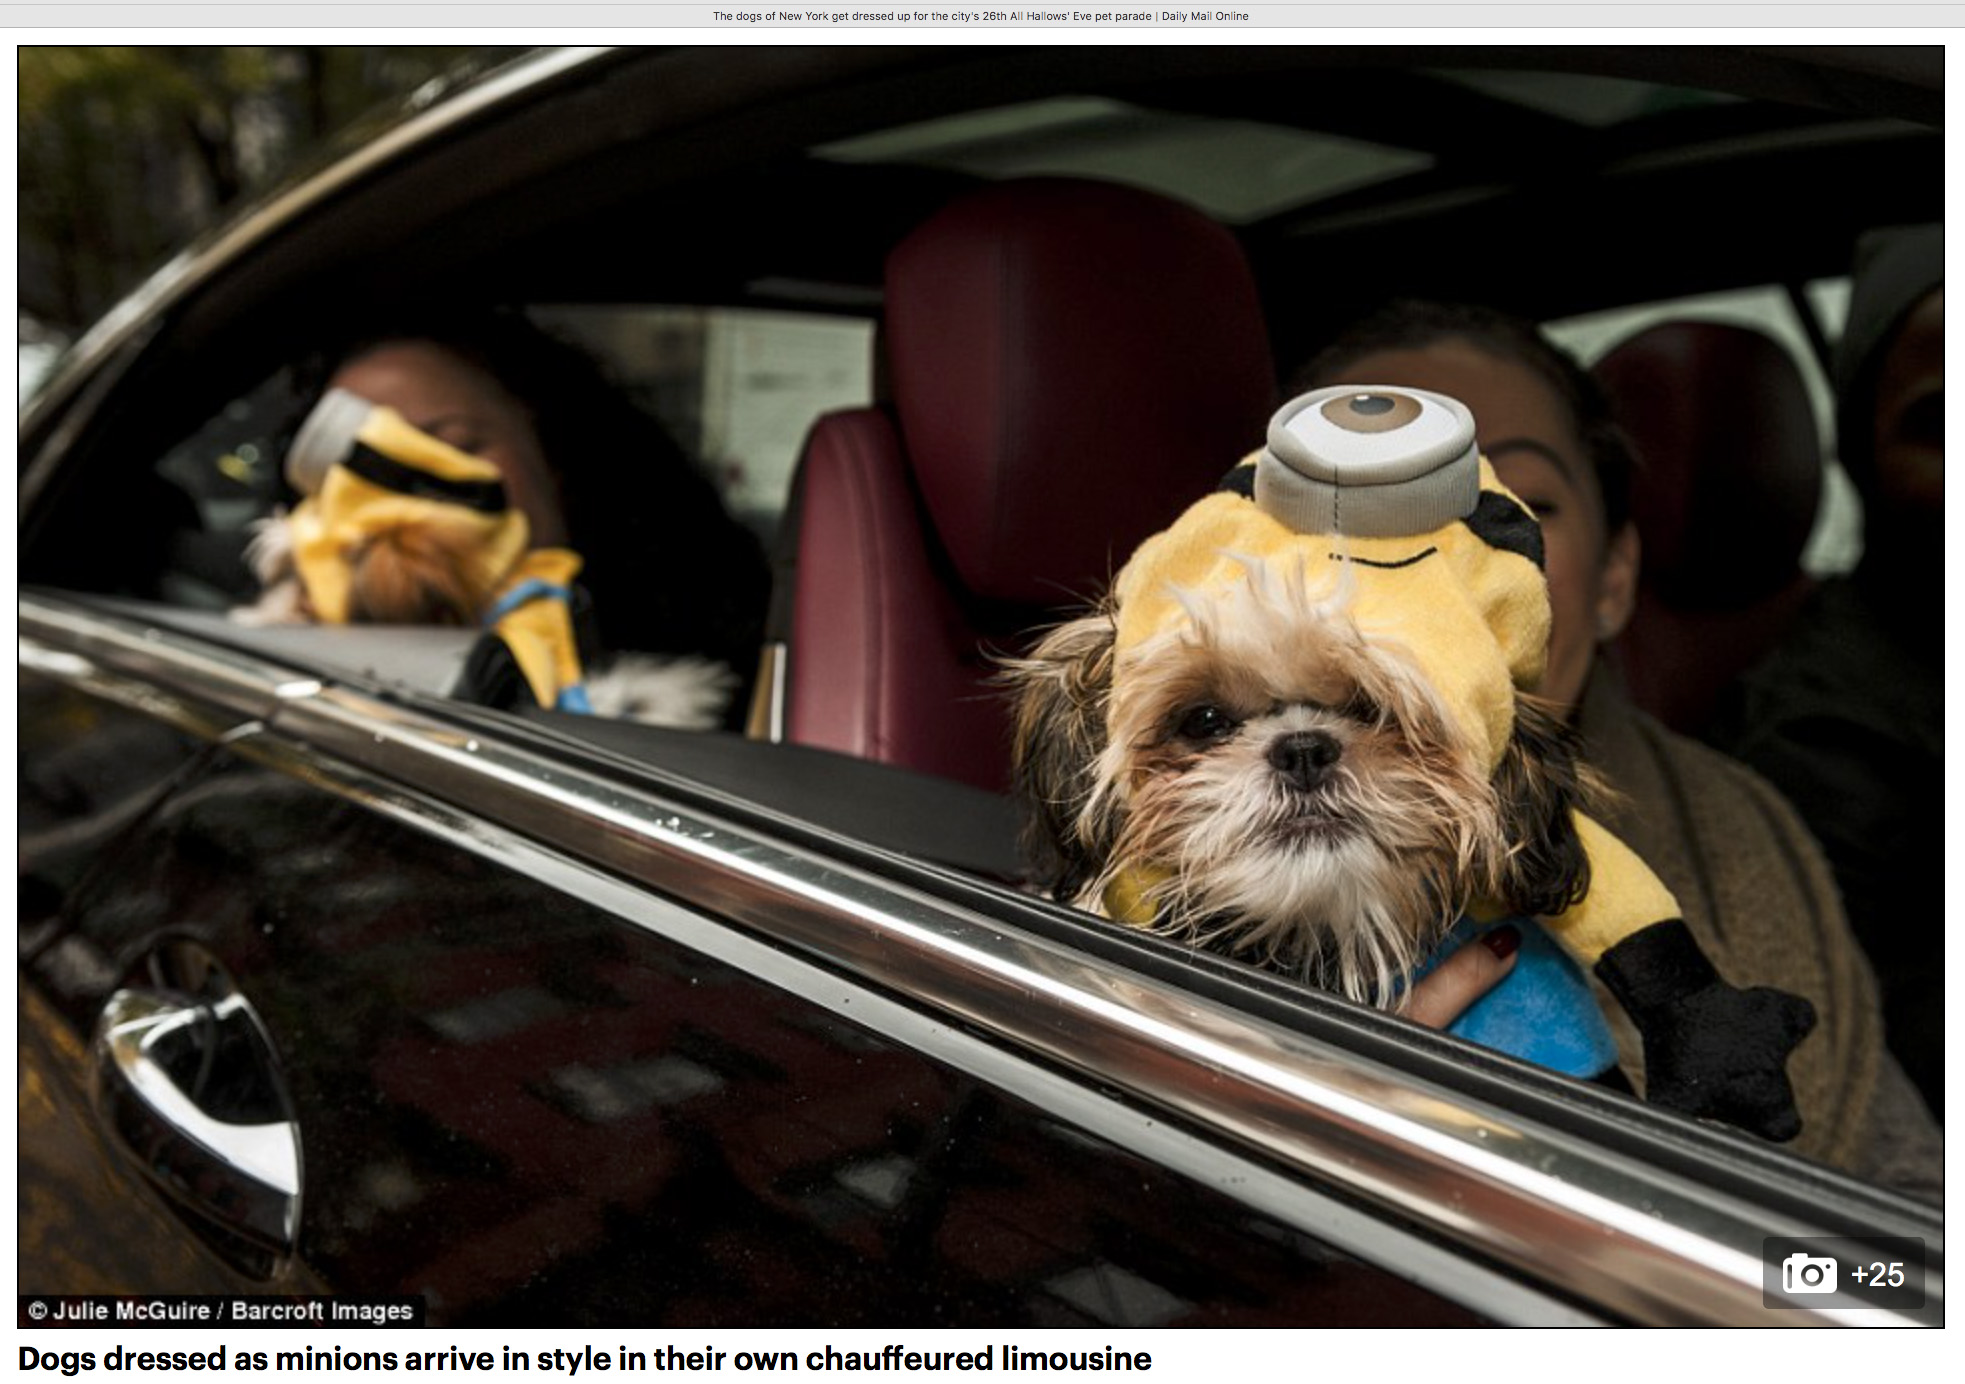 Minions arrive at the Halloween Dog Parade (Copy)